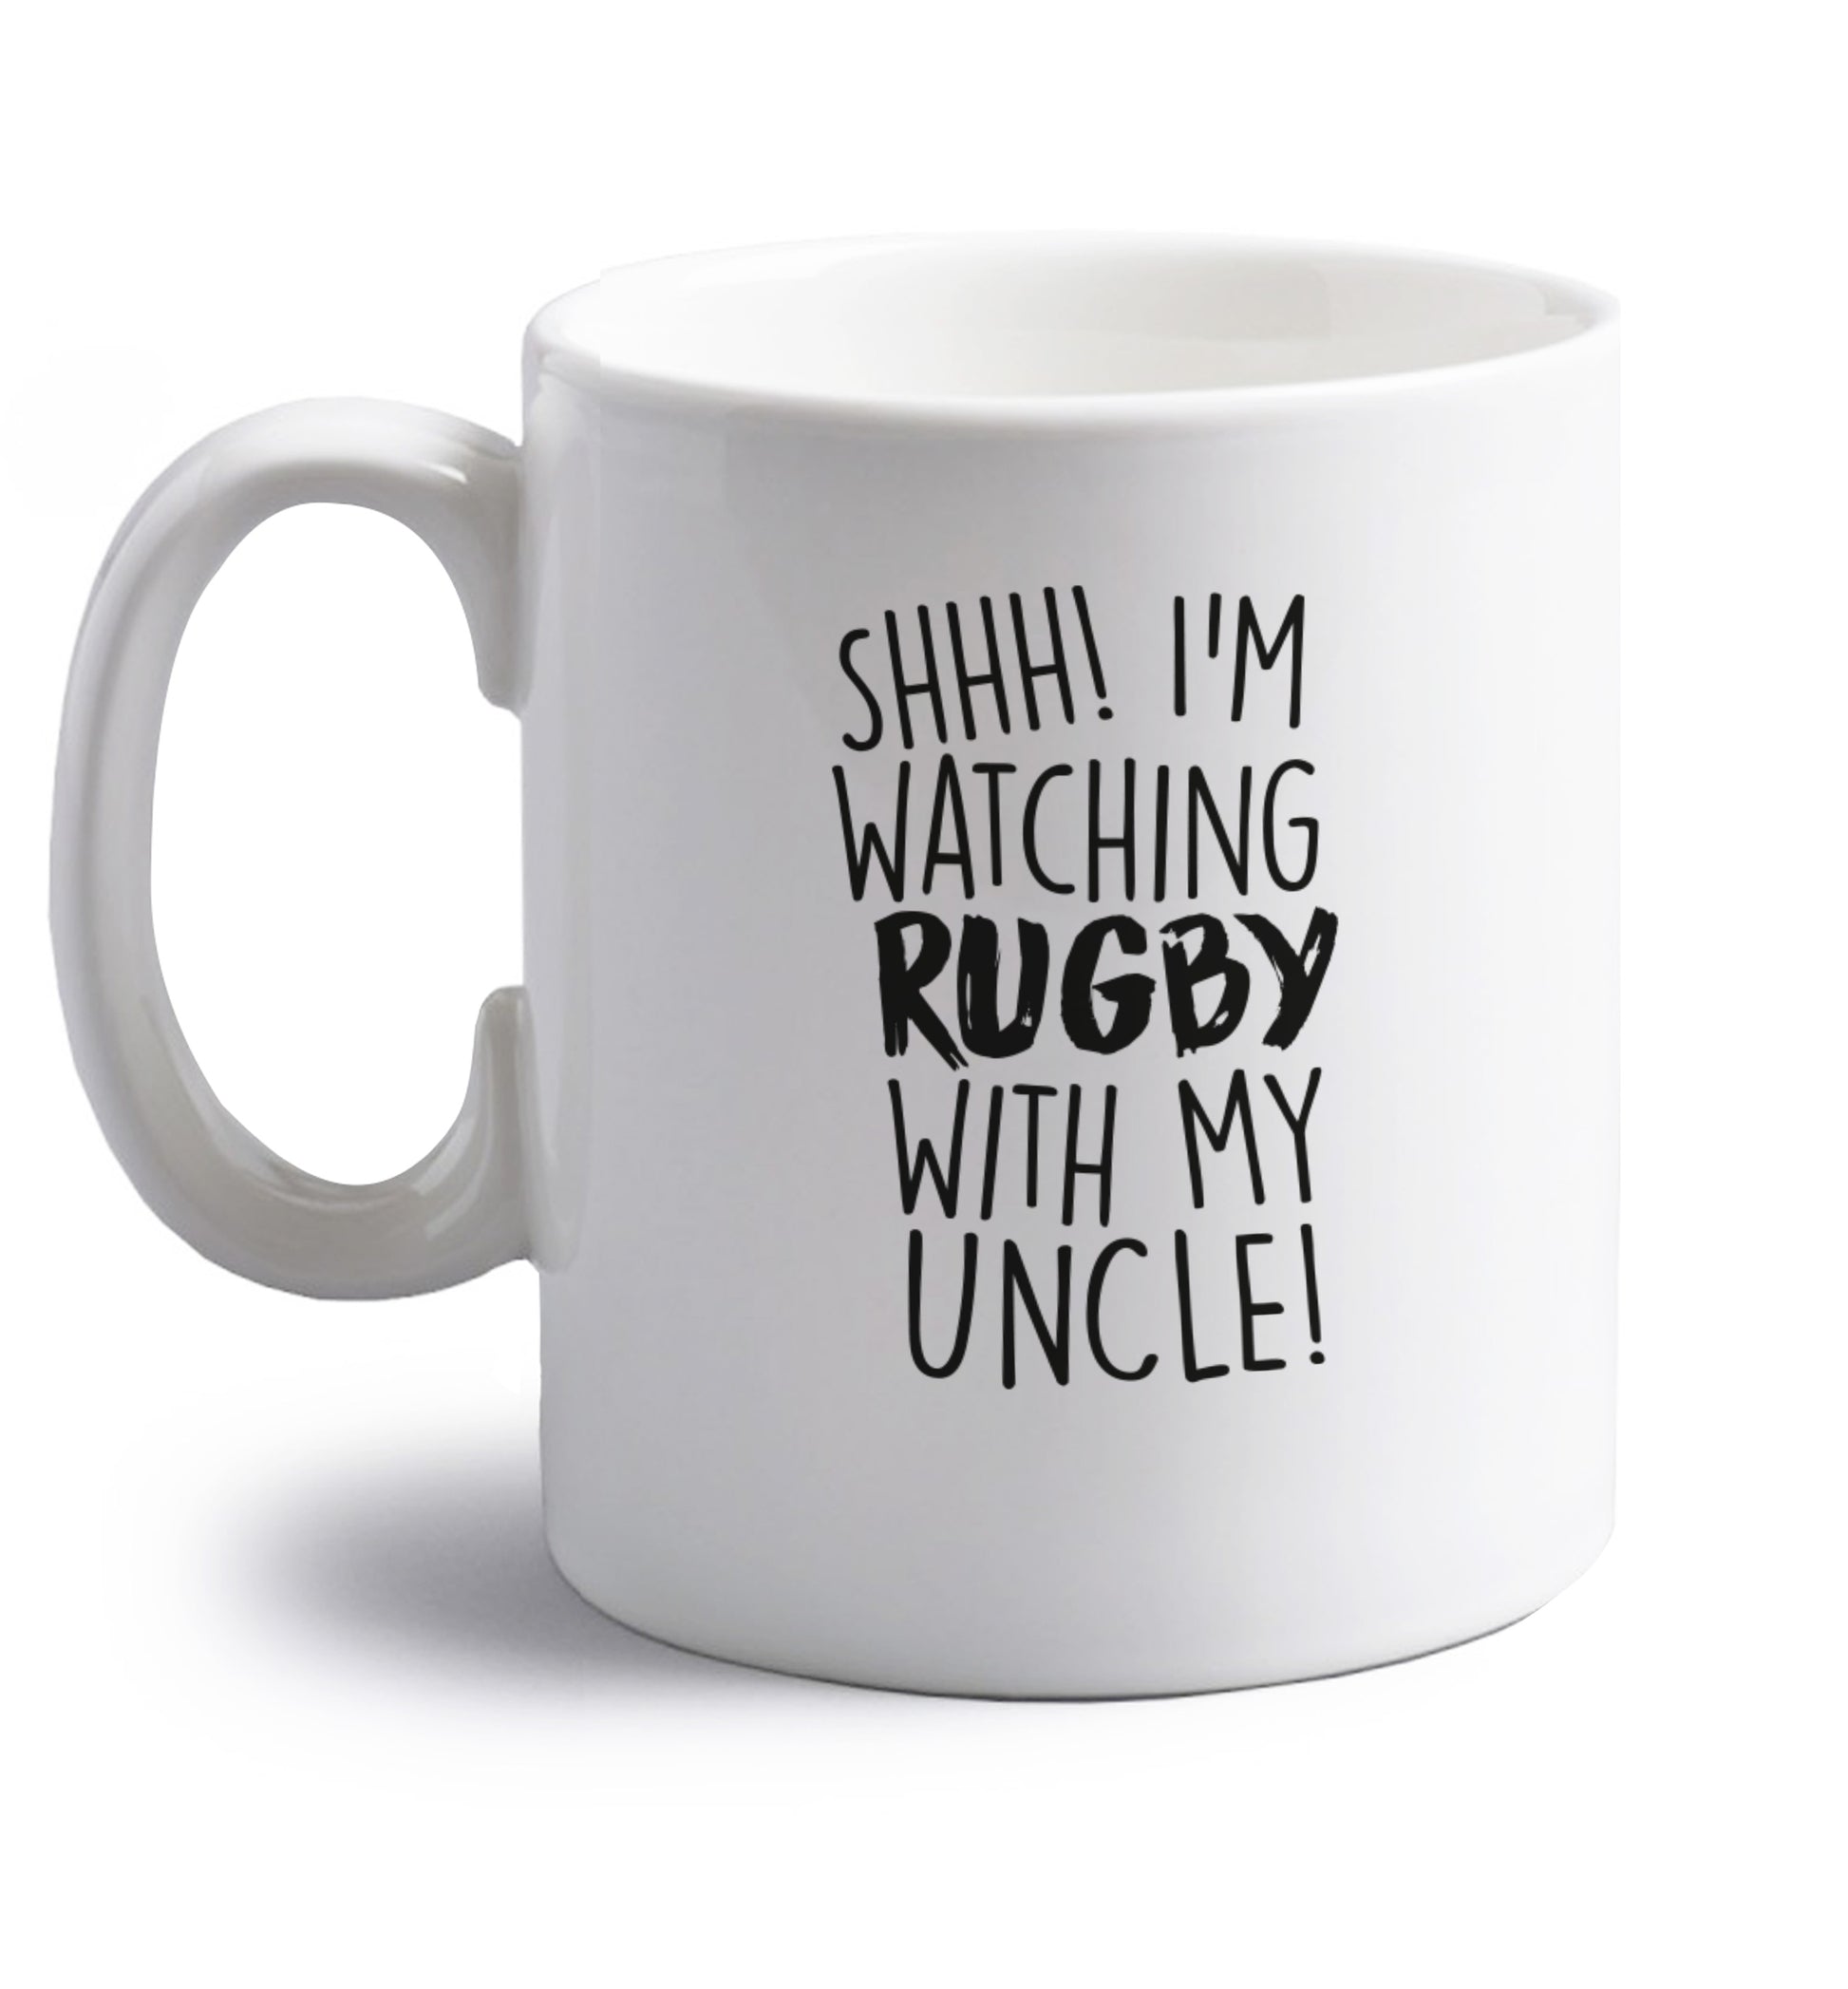 Shh.. I'm watching rugby with my uncle right handed white ceramic mug 